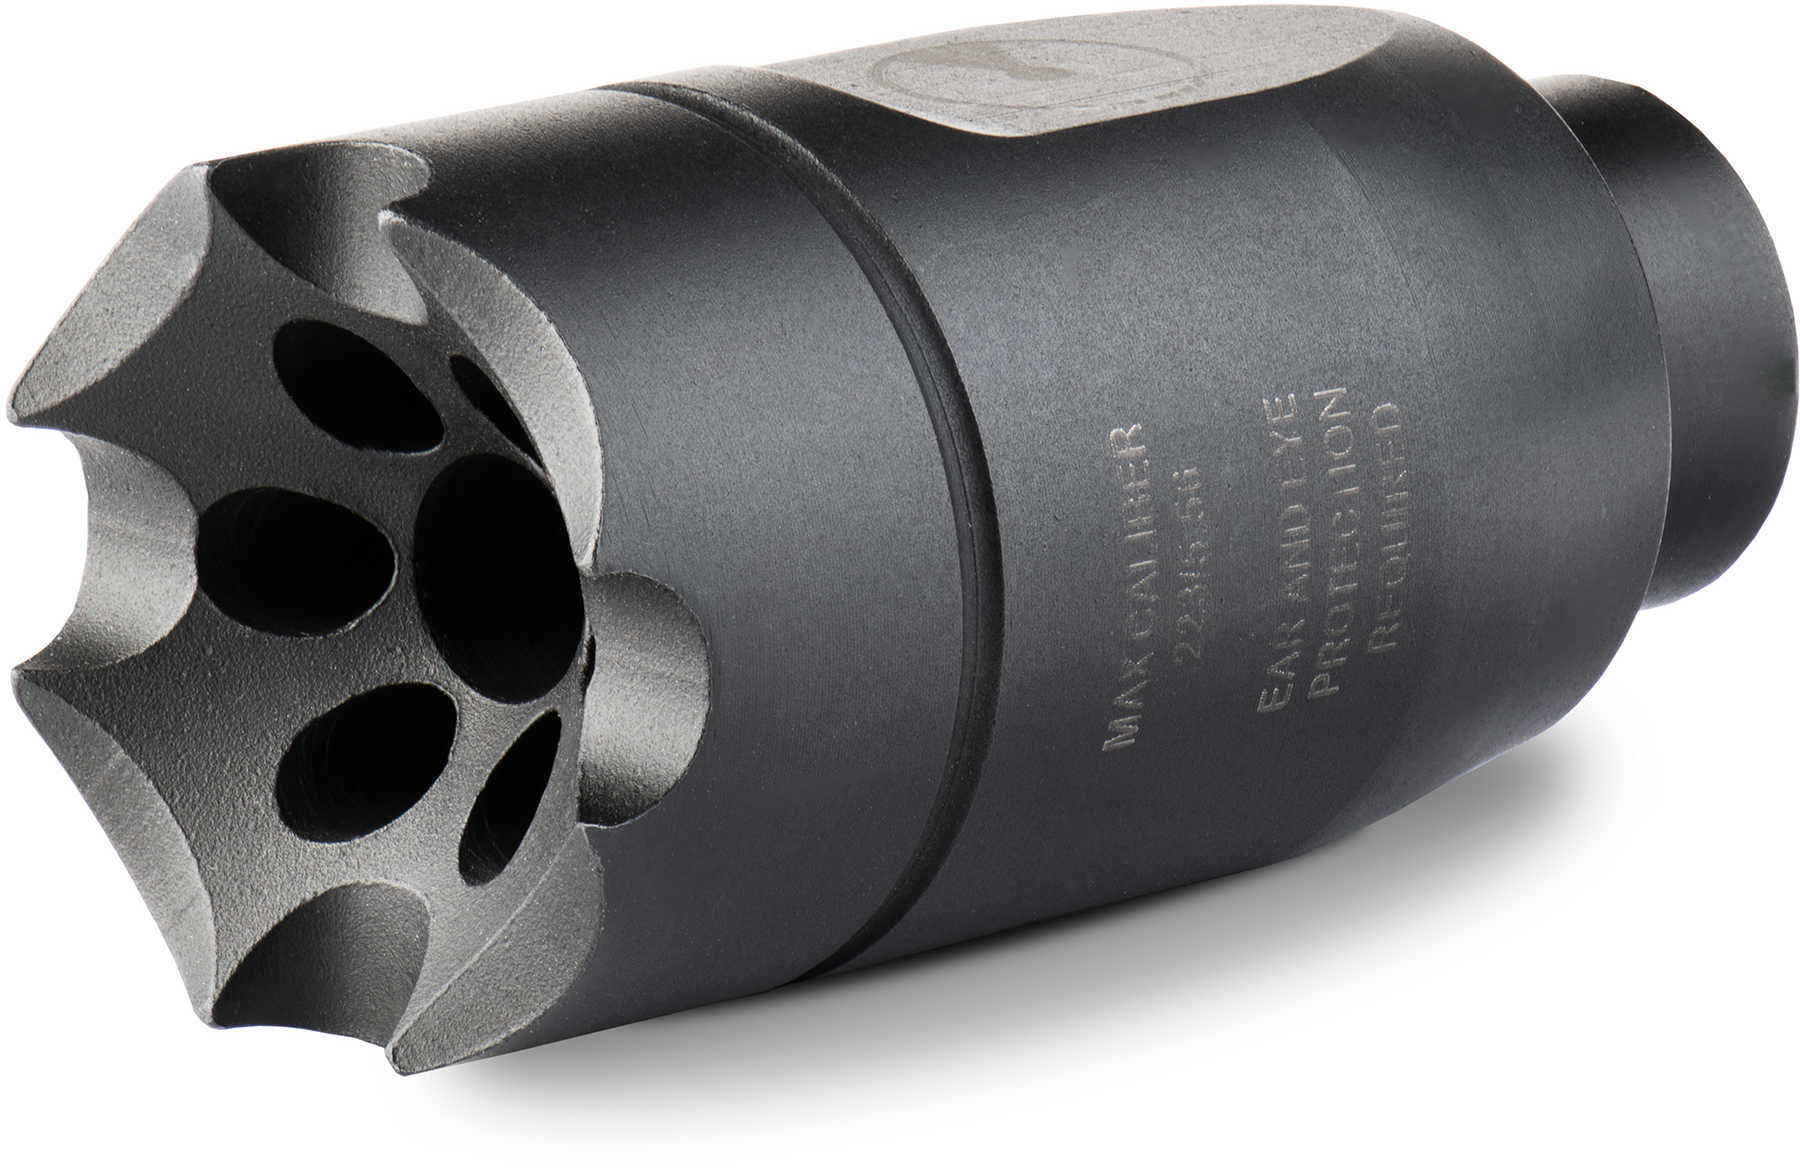 Ultradyne USA ATHENA Linear Compensator 762NATO/308 Winchester Fits AR-10s with 5/8X24 Threads Black 4.6 oz. 416 Stainle